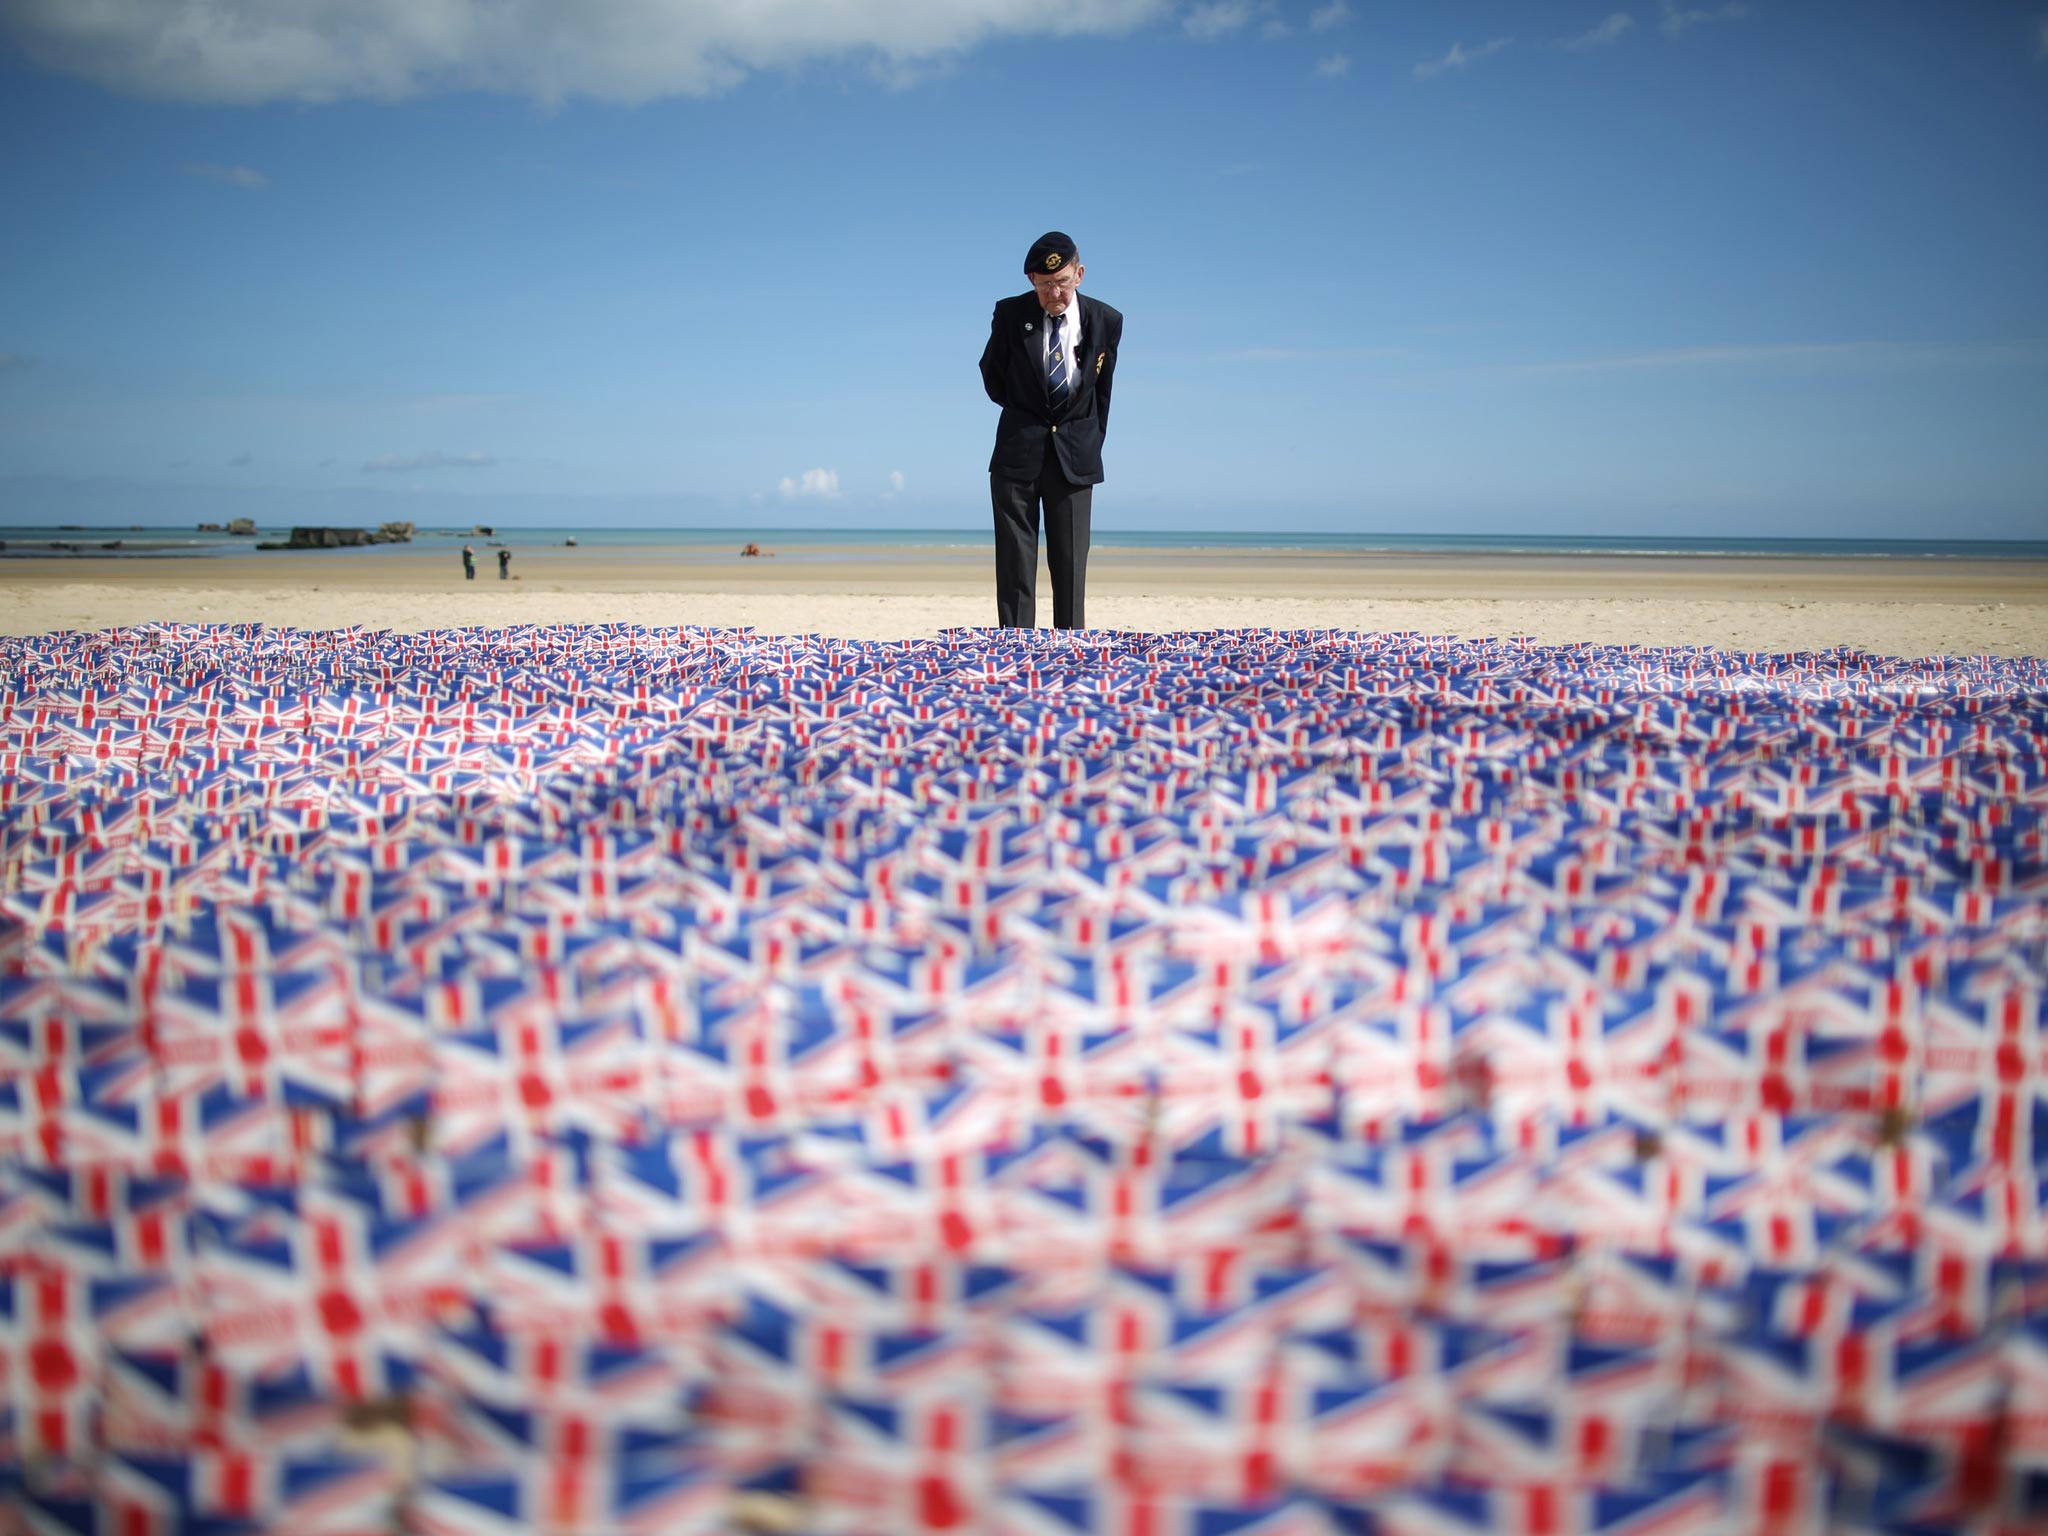 WW2 veteran Fred Holborn, from the Fleet Air Arm, looks at British Legion Union flags carrying thank you messages planted in the sand on Gold beach